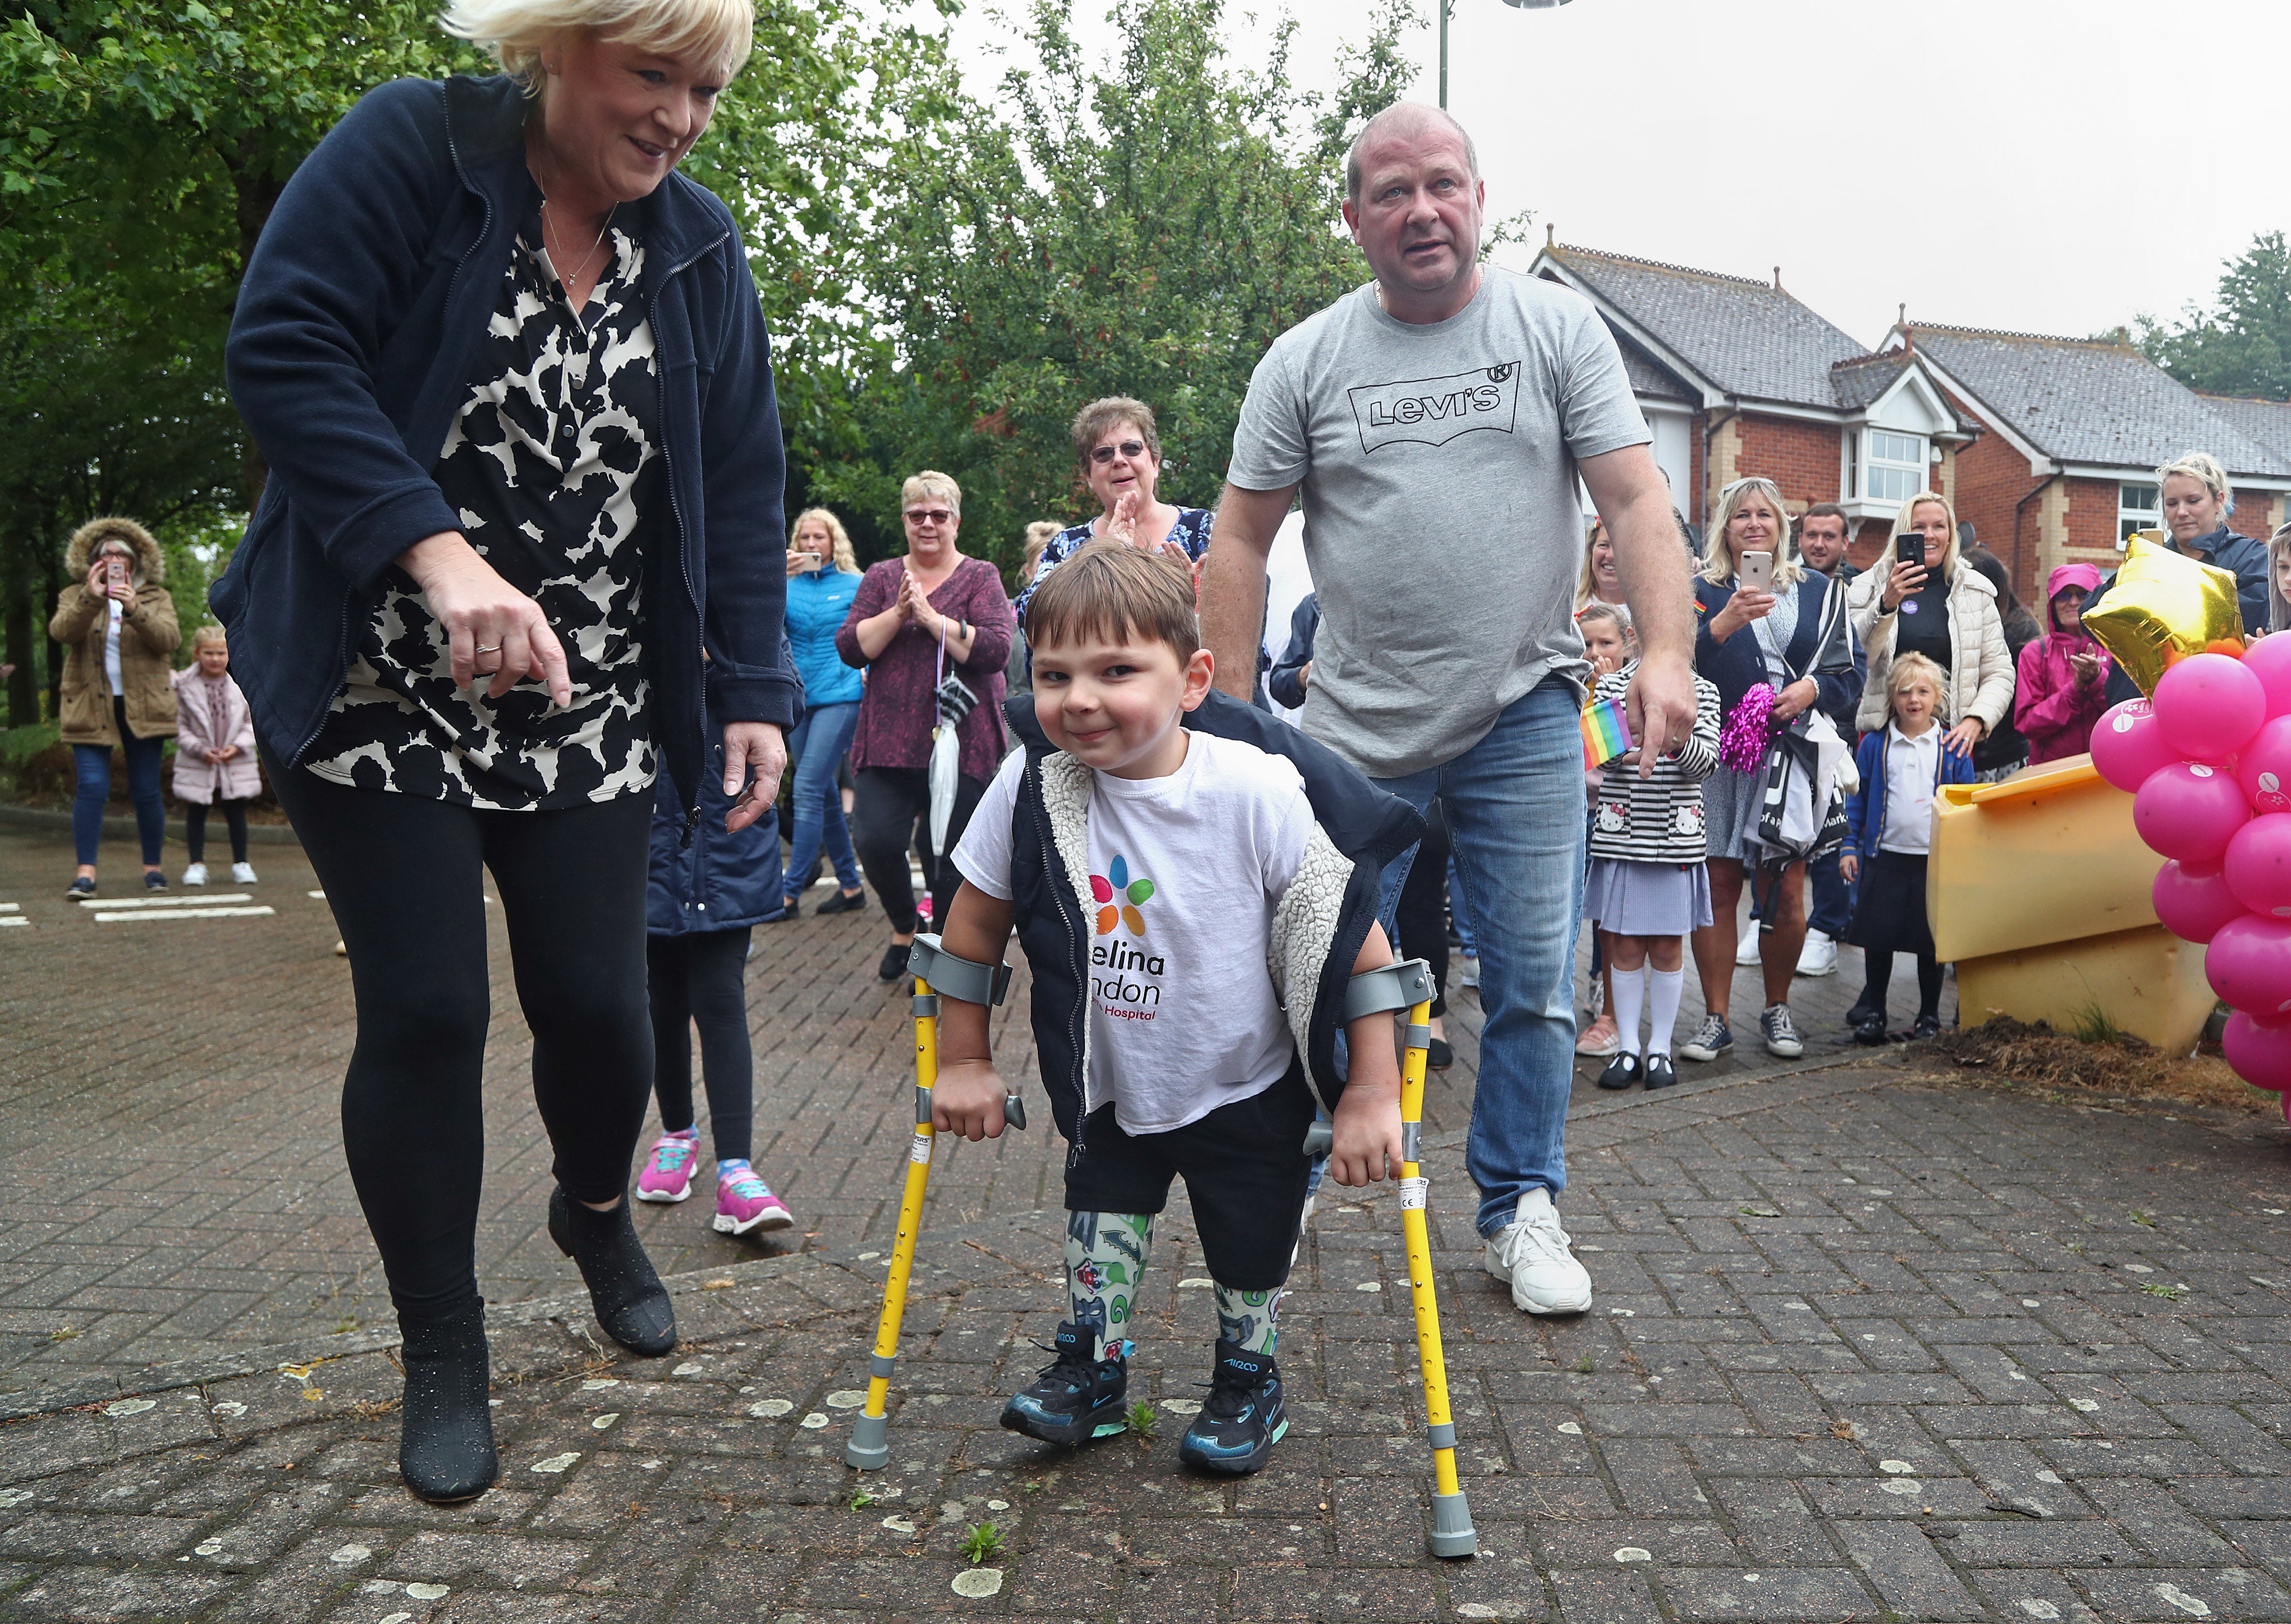 Tony Hudgell, who uses prosthetic legs, takes the final steps in his fundraising walk in West Malling, Kent, with adoptive parents Paula and Mark